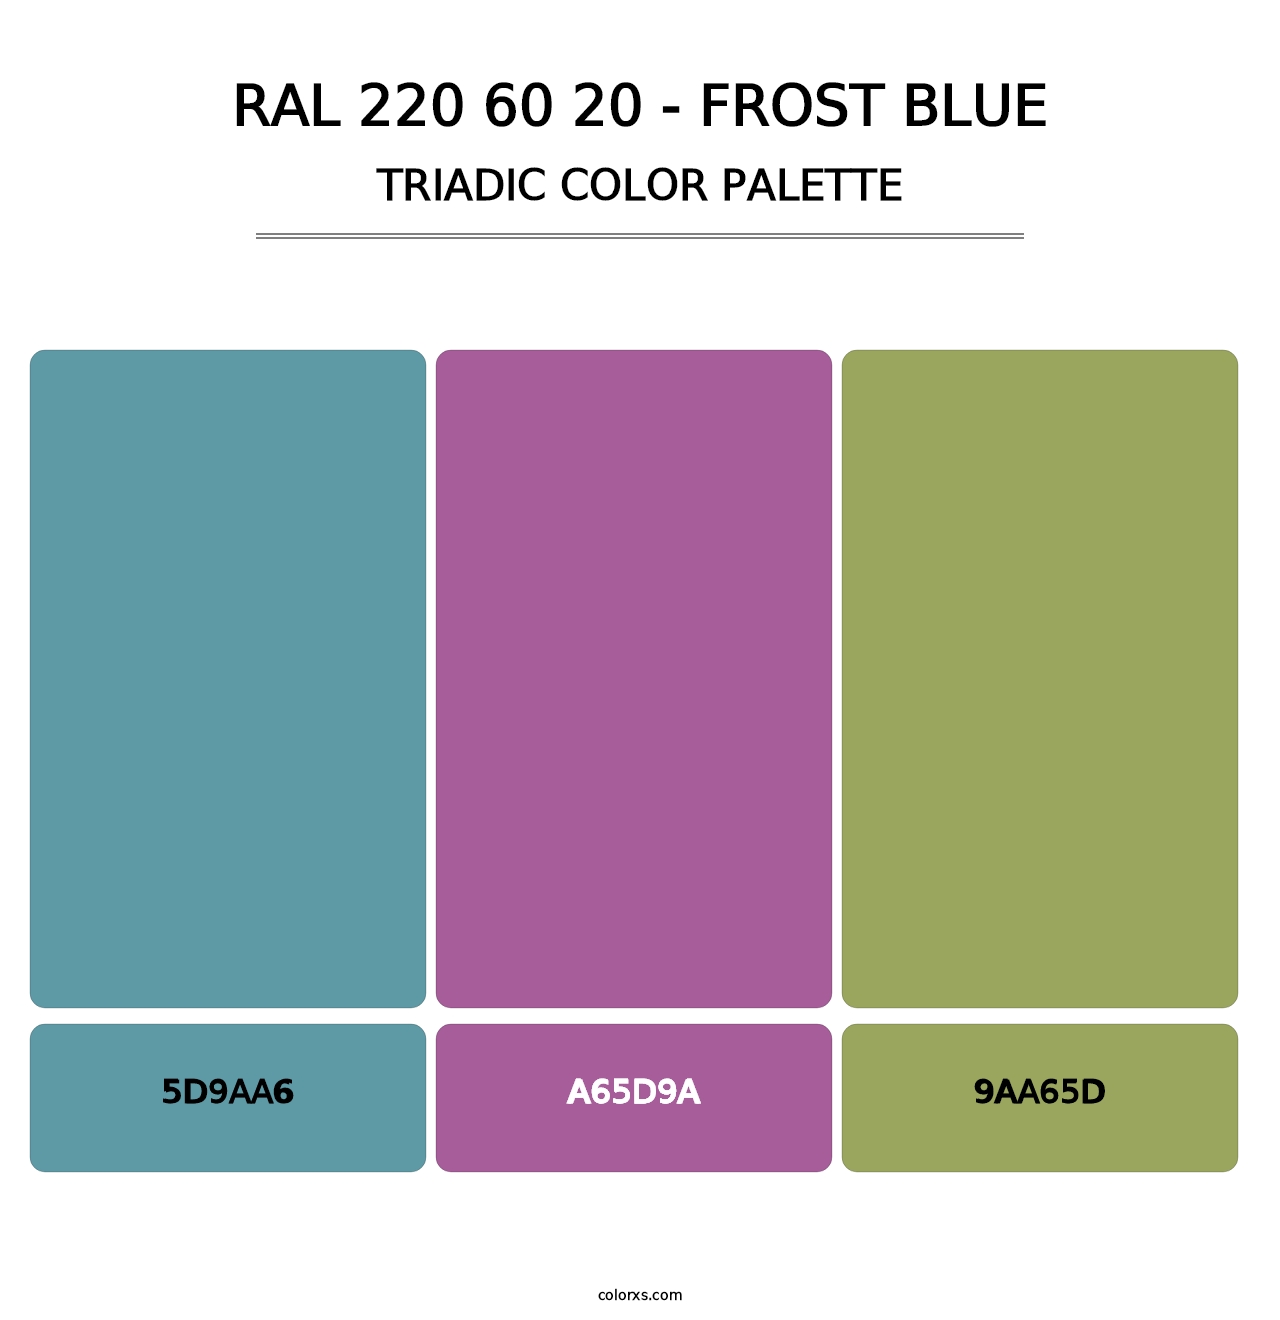 RAL 220 60 20 - Frost Blue - Triadic Color Palette